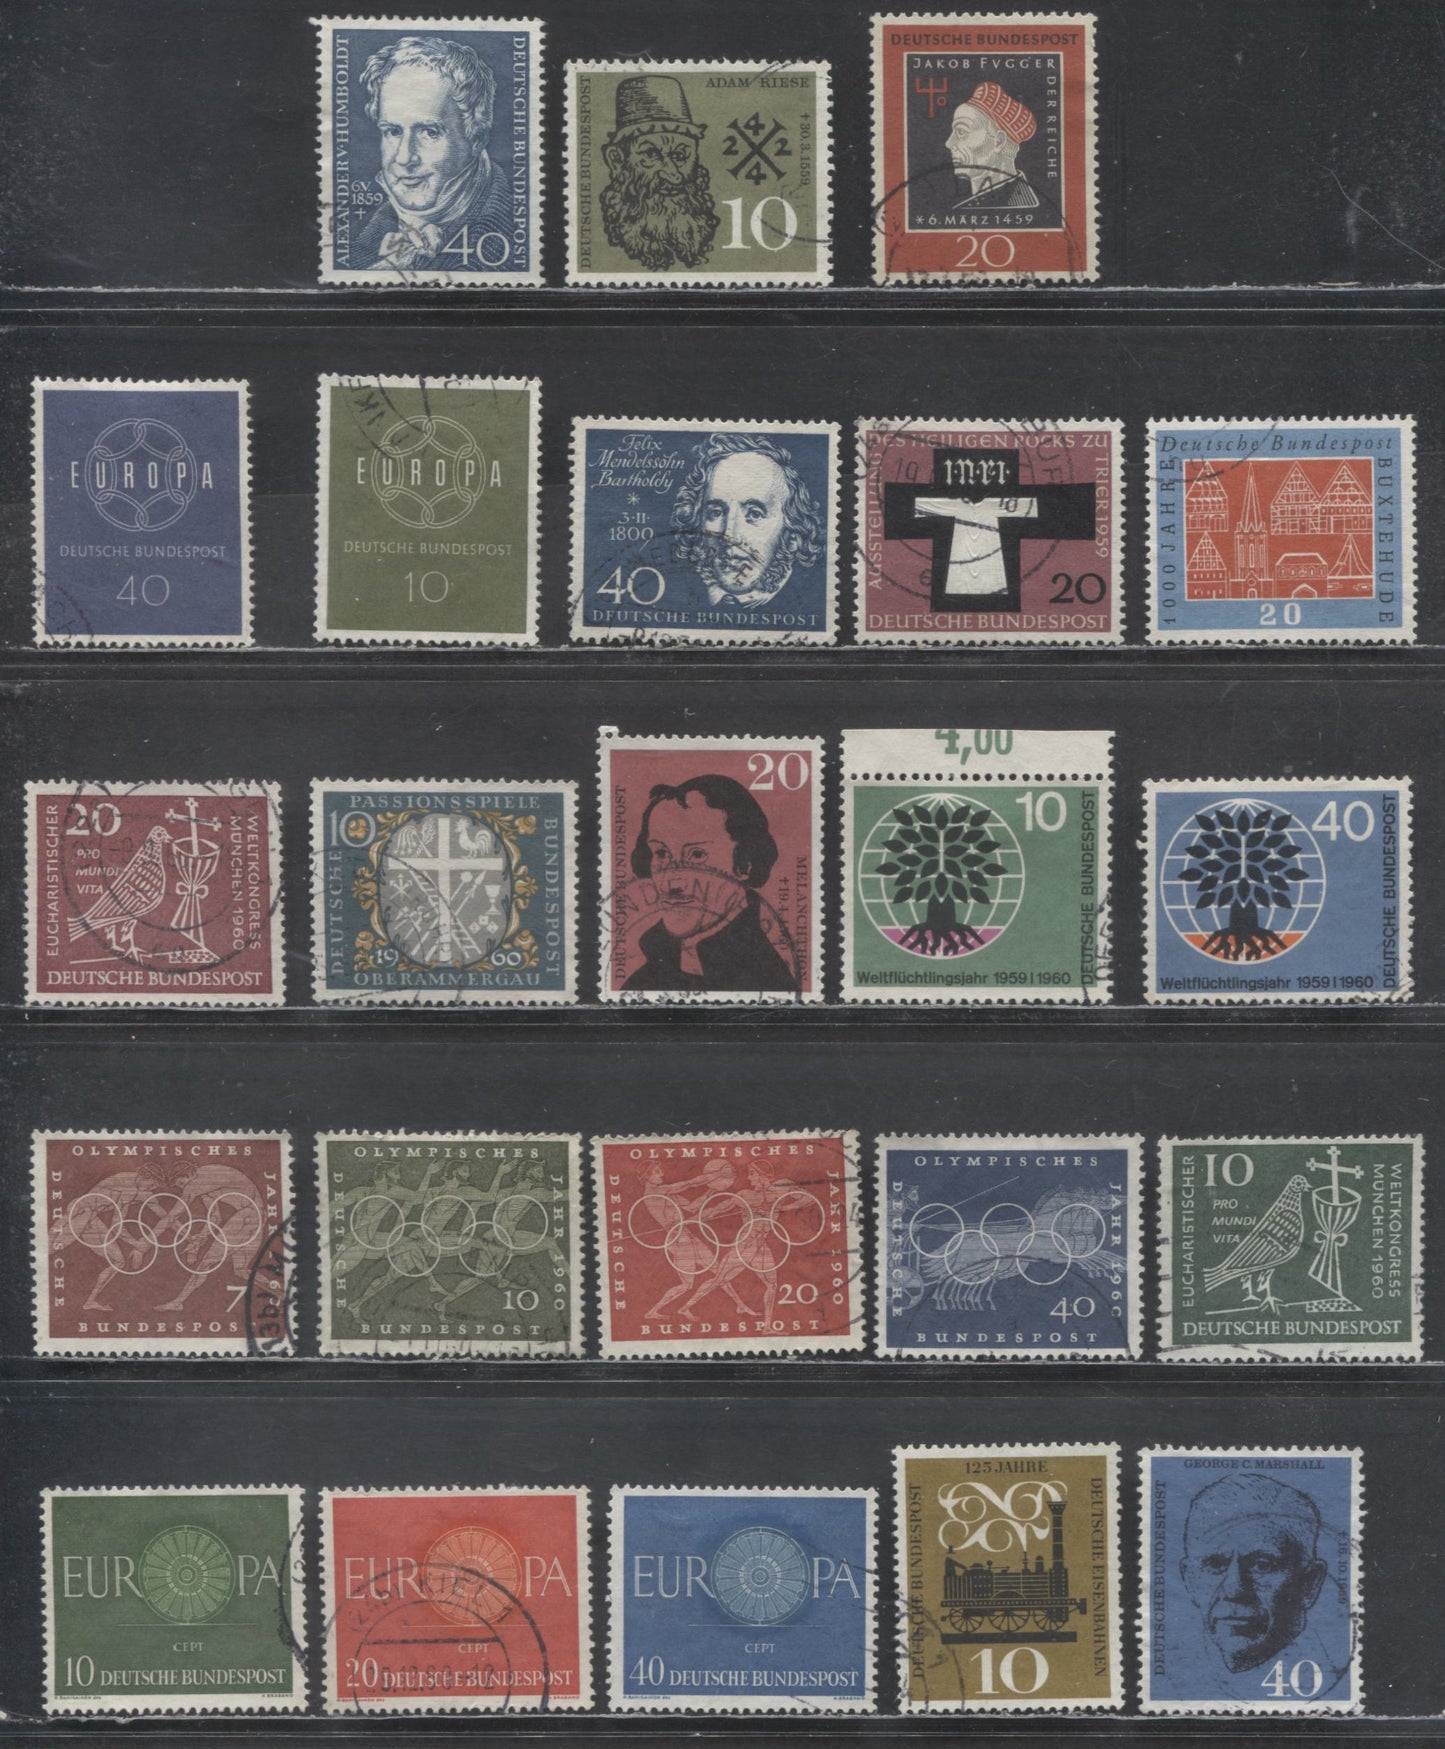 Lot 28 Germany SC#798/822 1959-1960 Definitives, 25 Fine/Very Fine Used Singles, Click on Listing to See ALL Pictures, Estimated Value $15